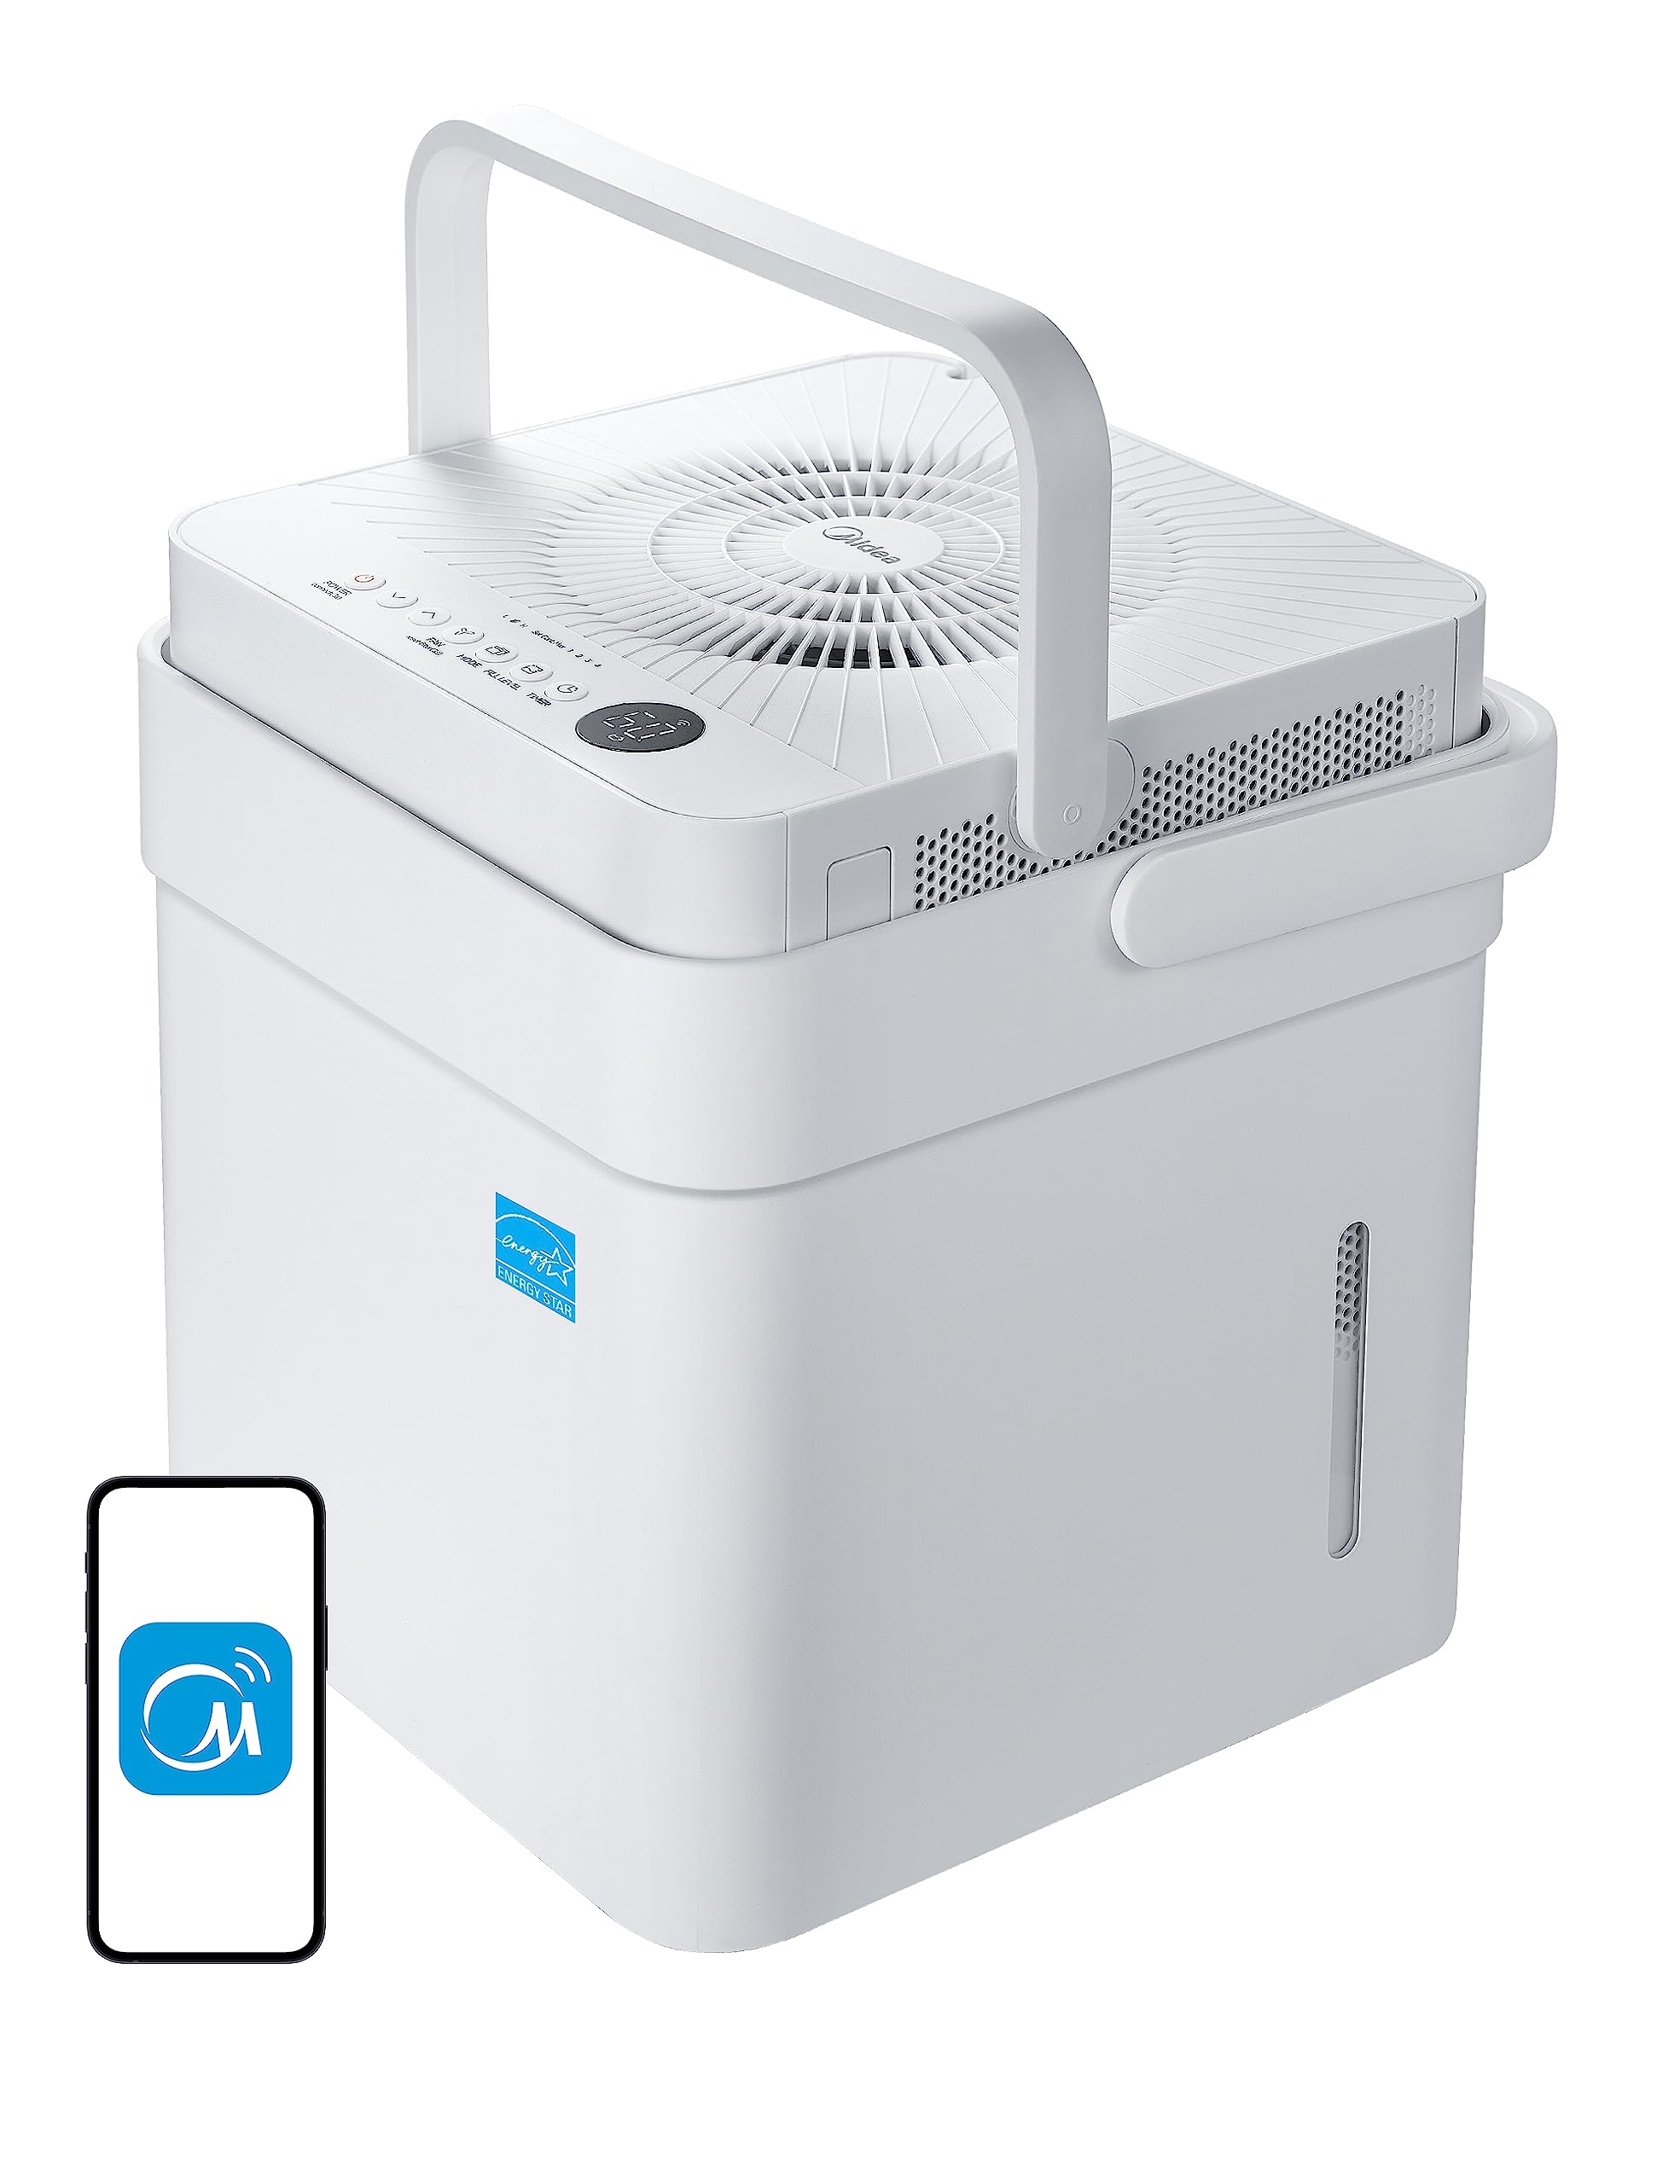 Midea Cube 35 Pint Dehumidifier for Basement and Rooms at Home for up to 3,500 Sq. Ft., Smart Control, Works with Alexa (White), Drain Hose Included, ENERGY STAR Most Efficient 2022